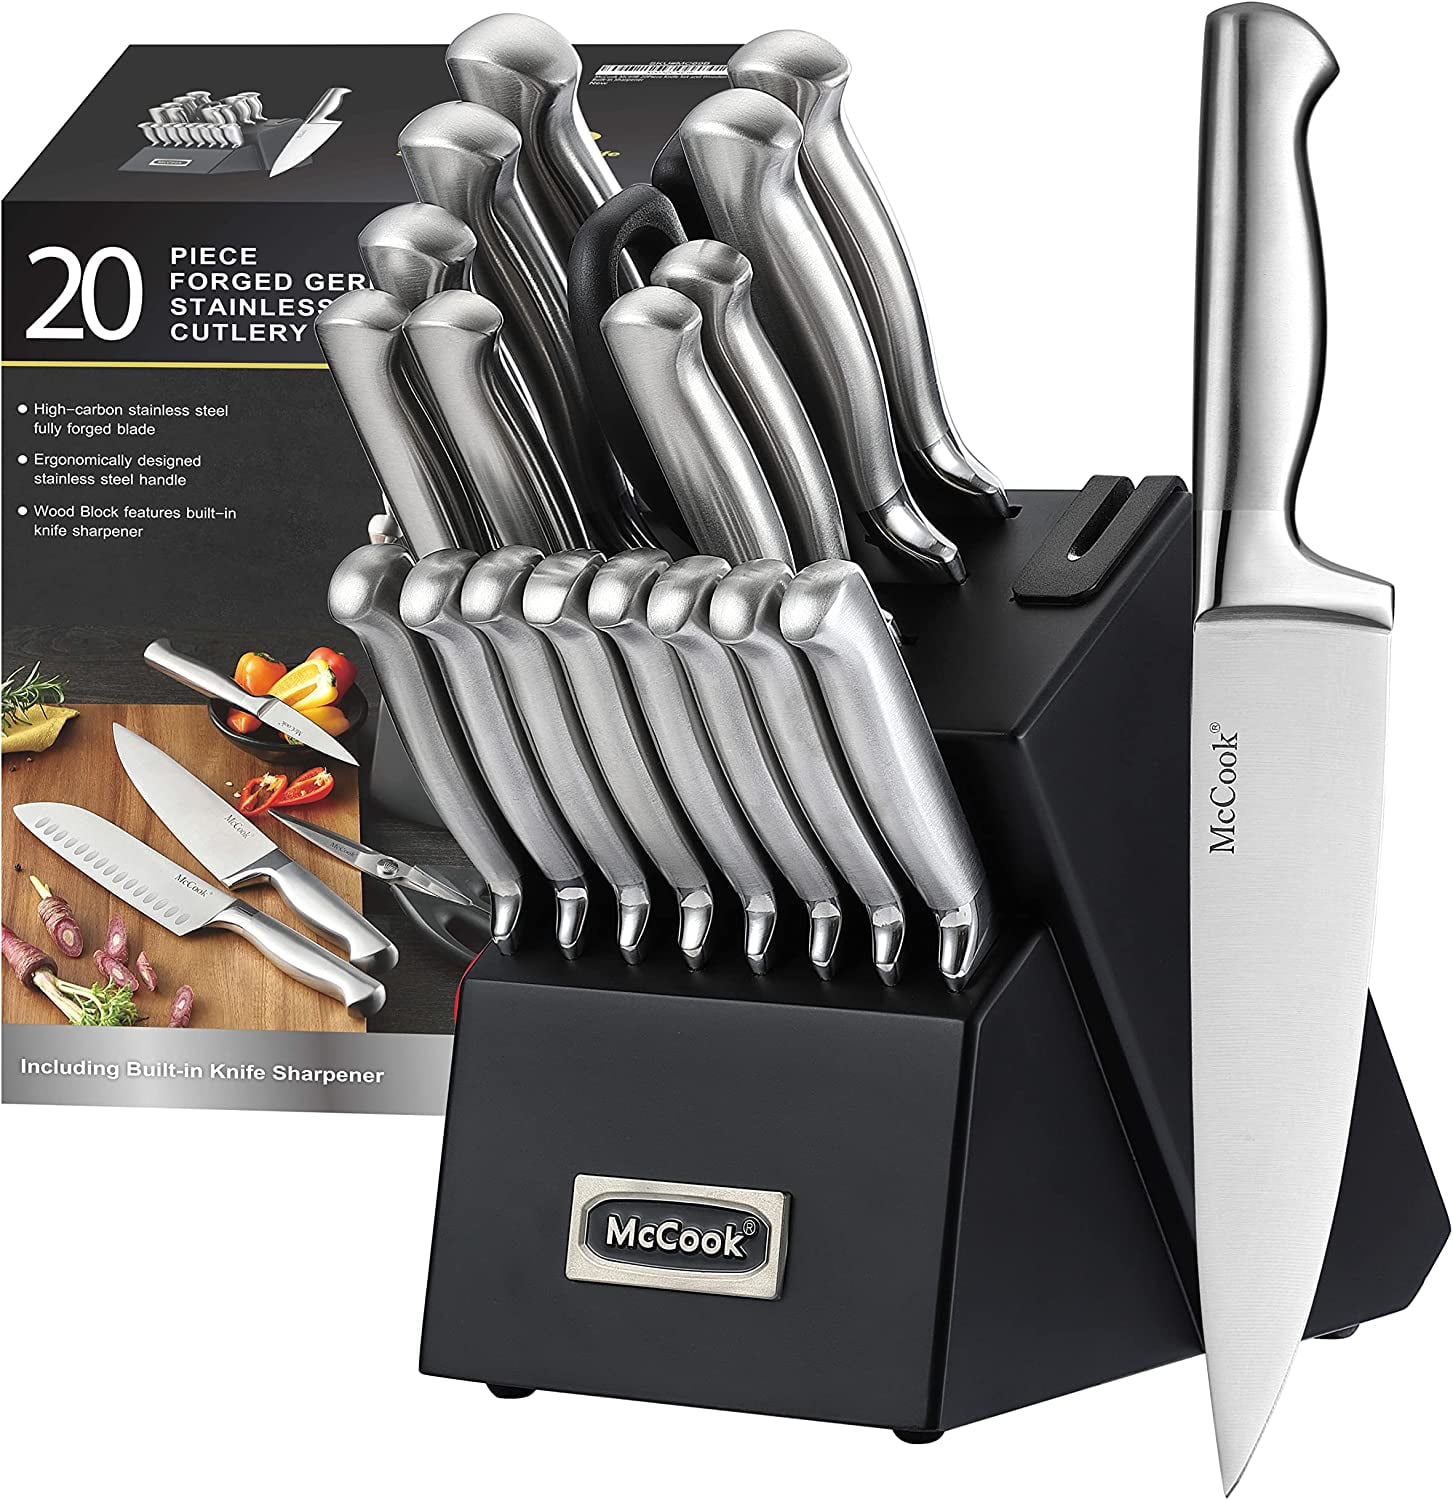 McCook MC29 Knife Sets,15 Pieces German Stainless Steel Kitchen Knife Sets,  Color: walnut, Y0290 - Cutlery & Kitchen Knives, Facebook Marketplace